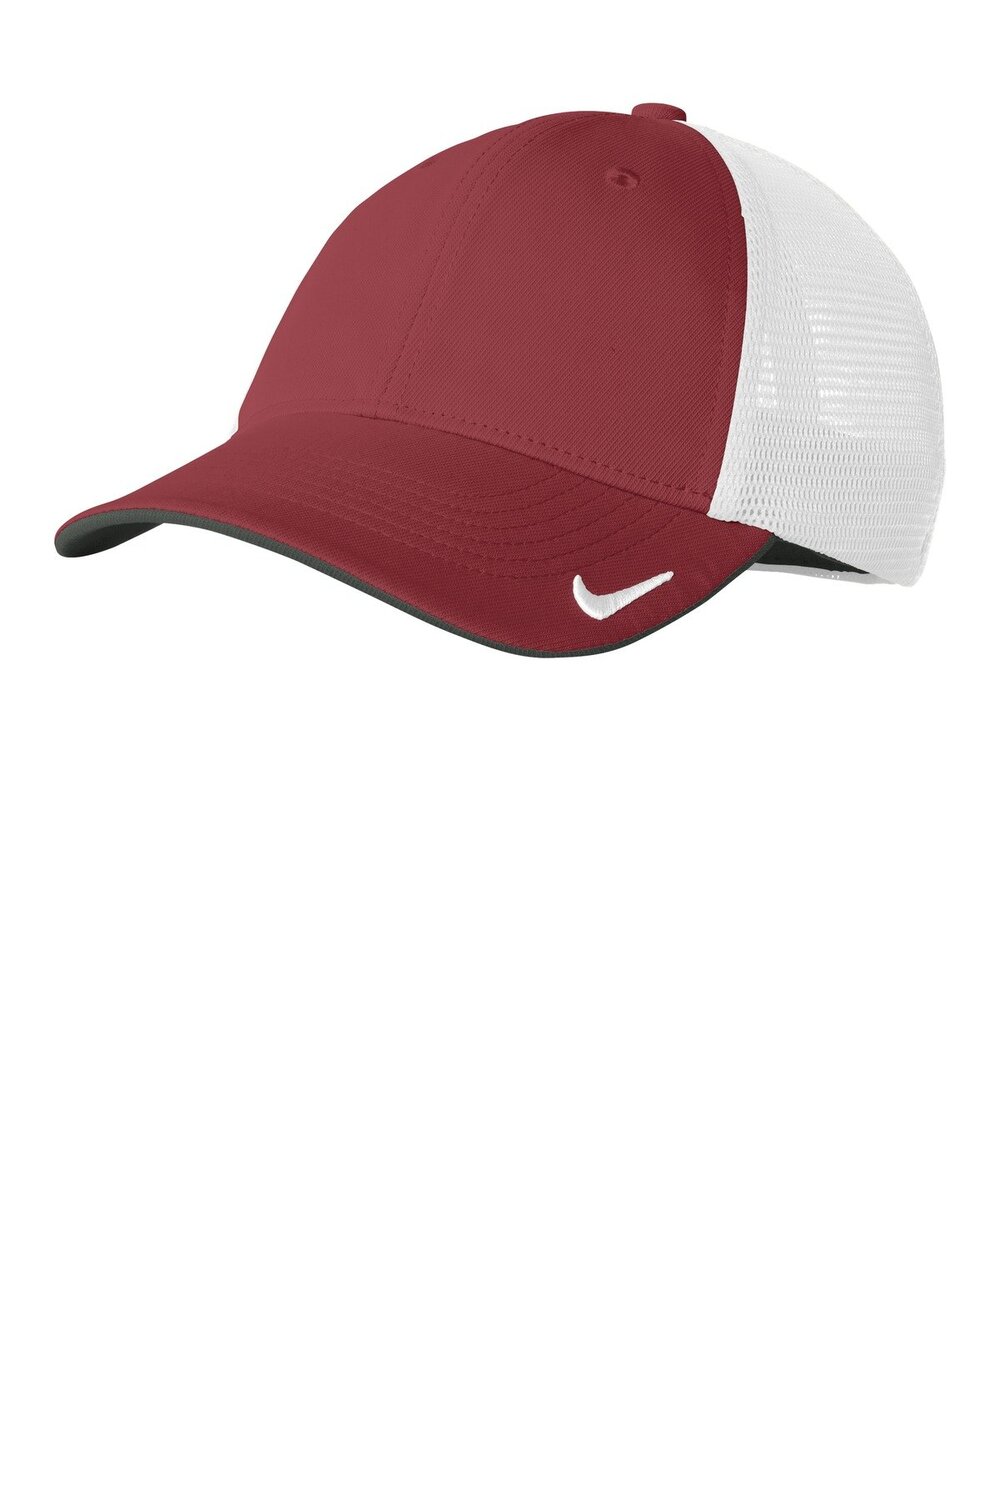 Nike Dri-FIT Mesh Back Cap. NKAO9293 — Tag your Swag